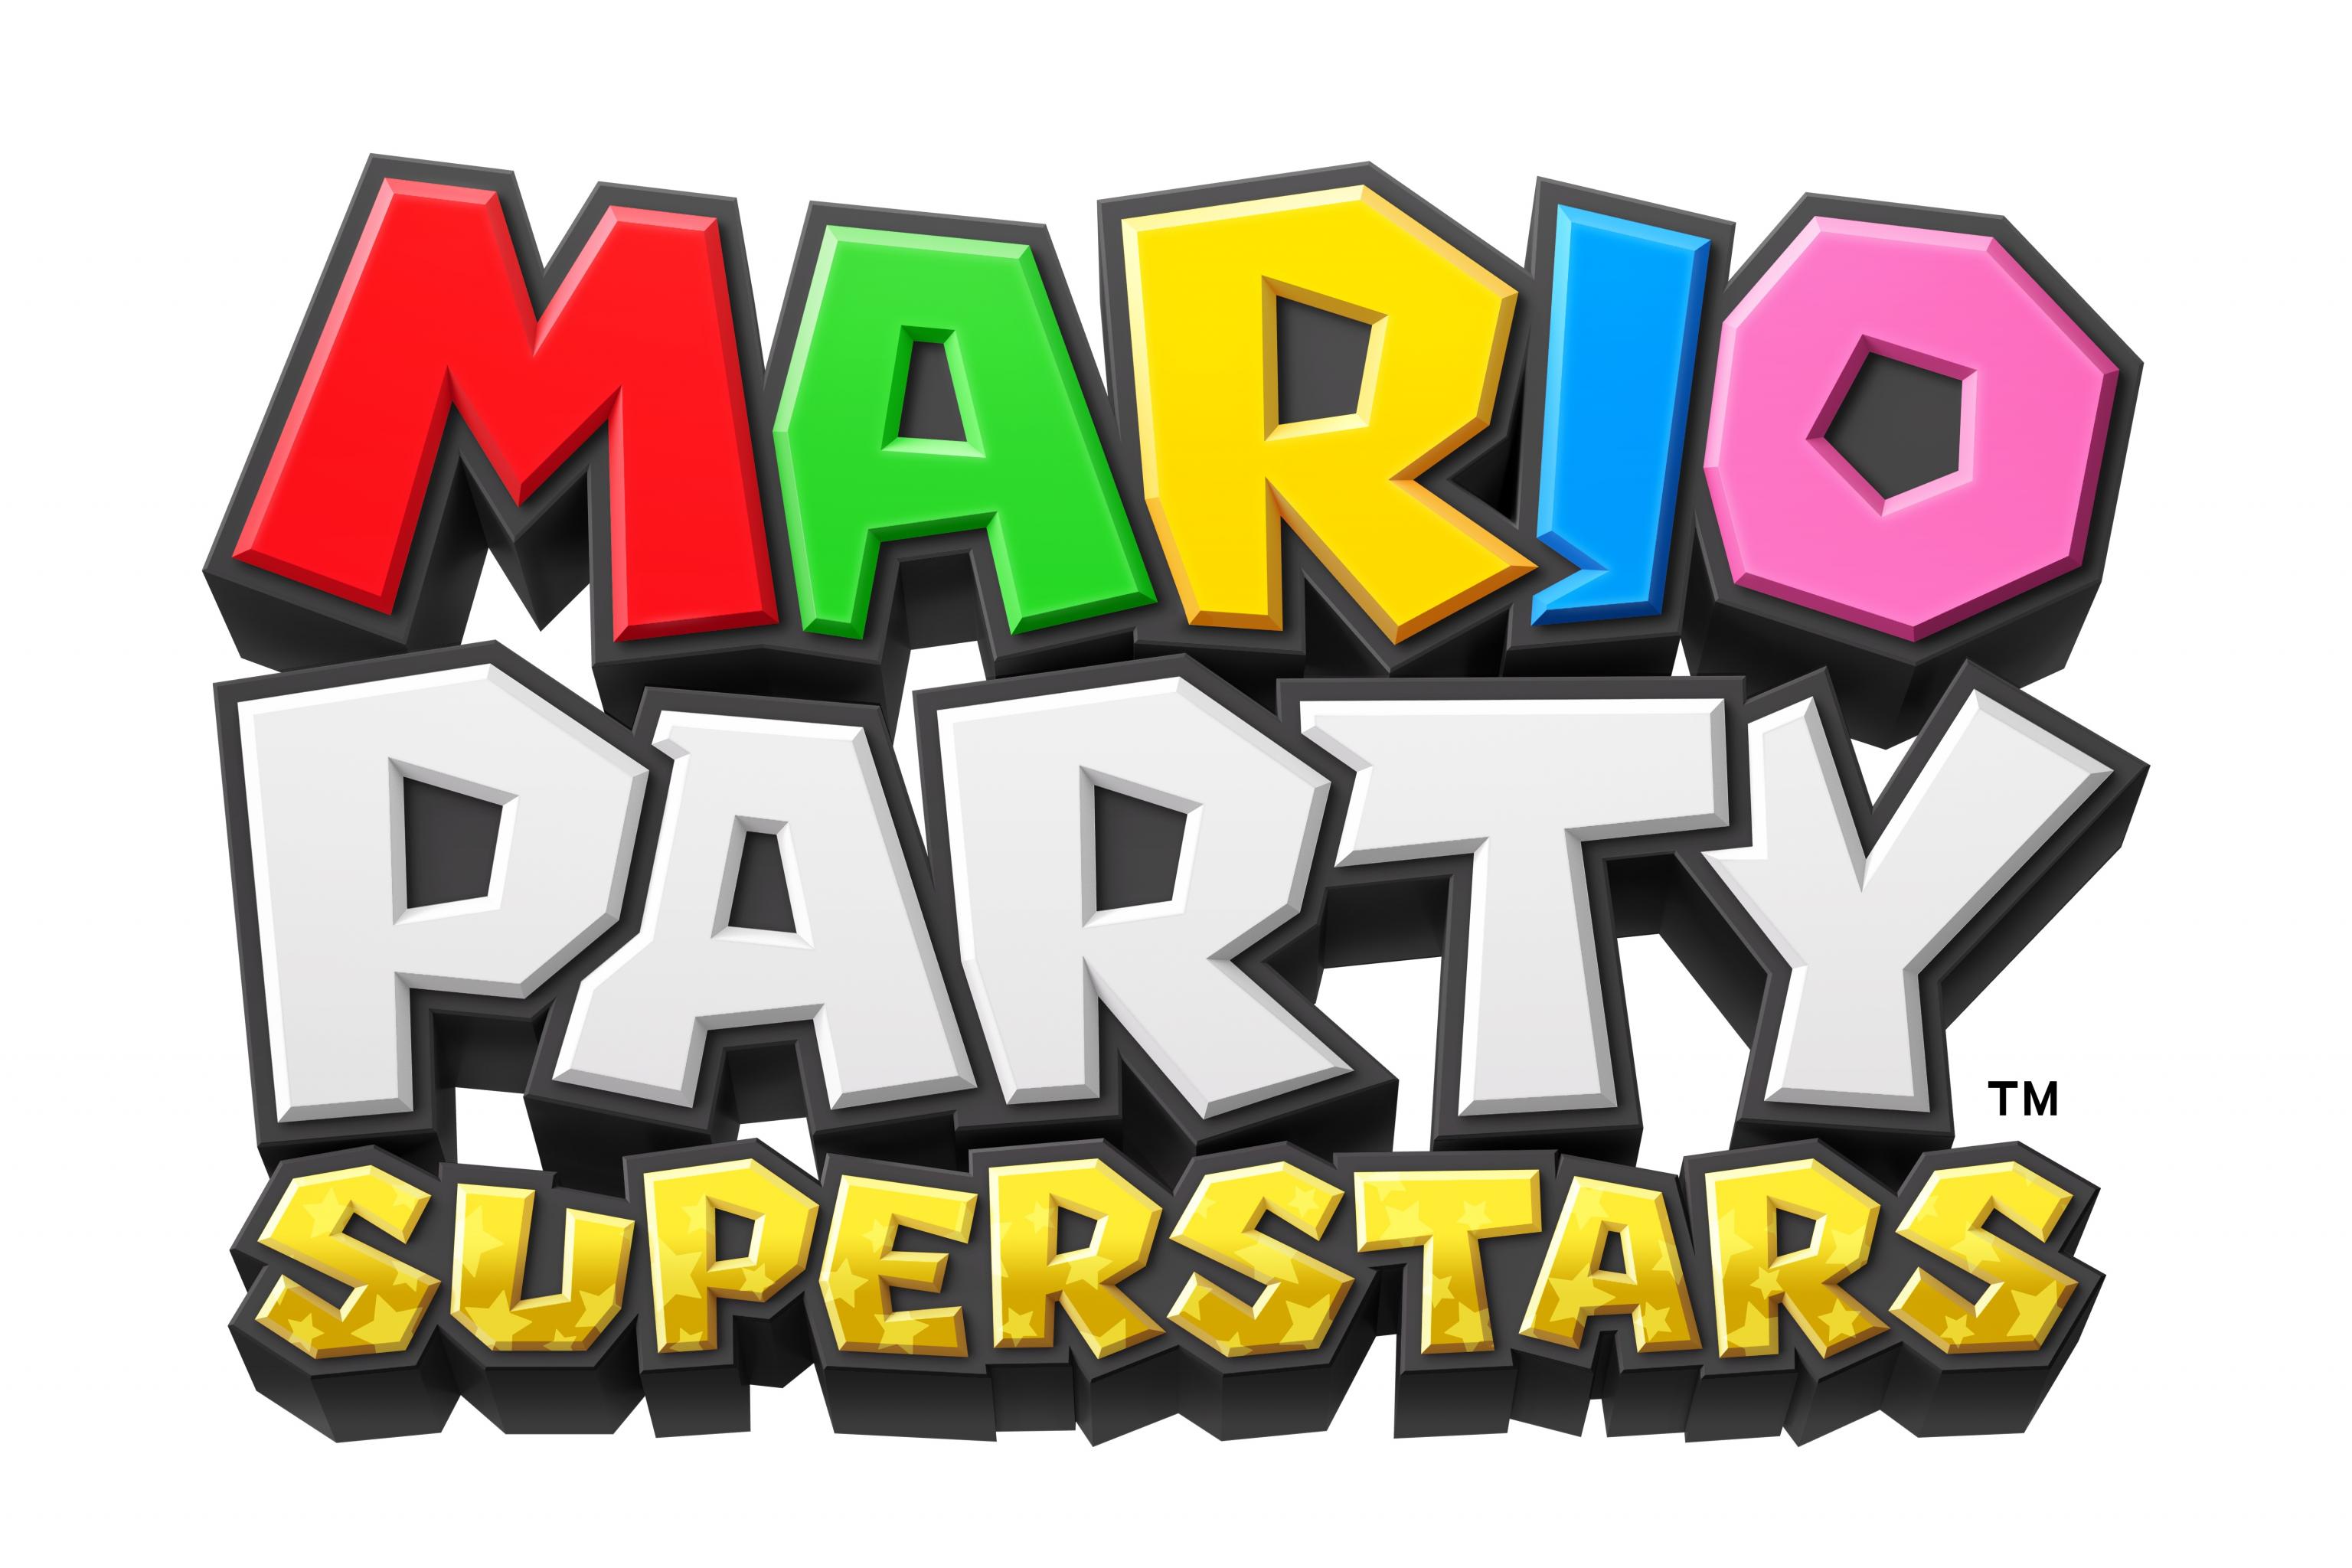 Would you like Mario Party 9 on Nintendo Switch? : r/Switch